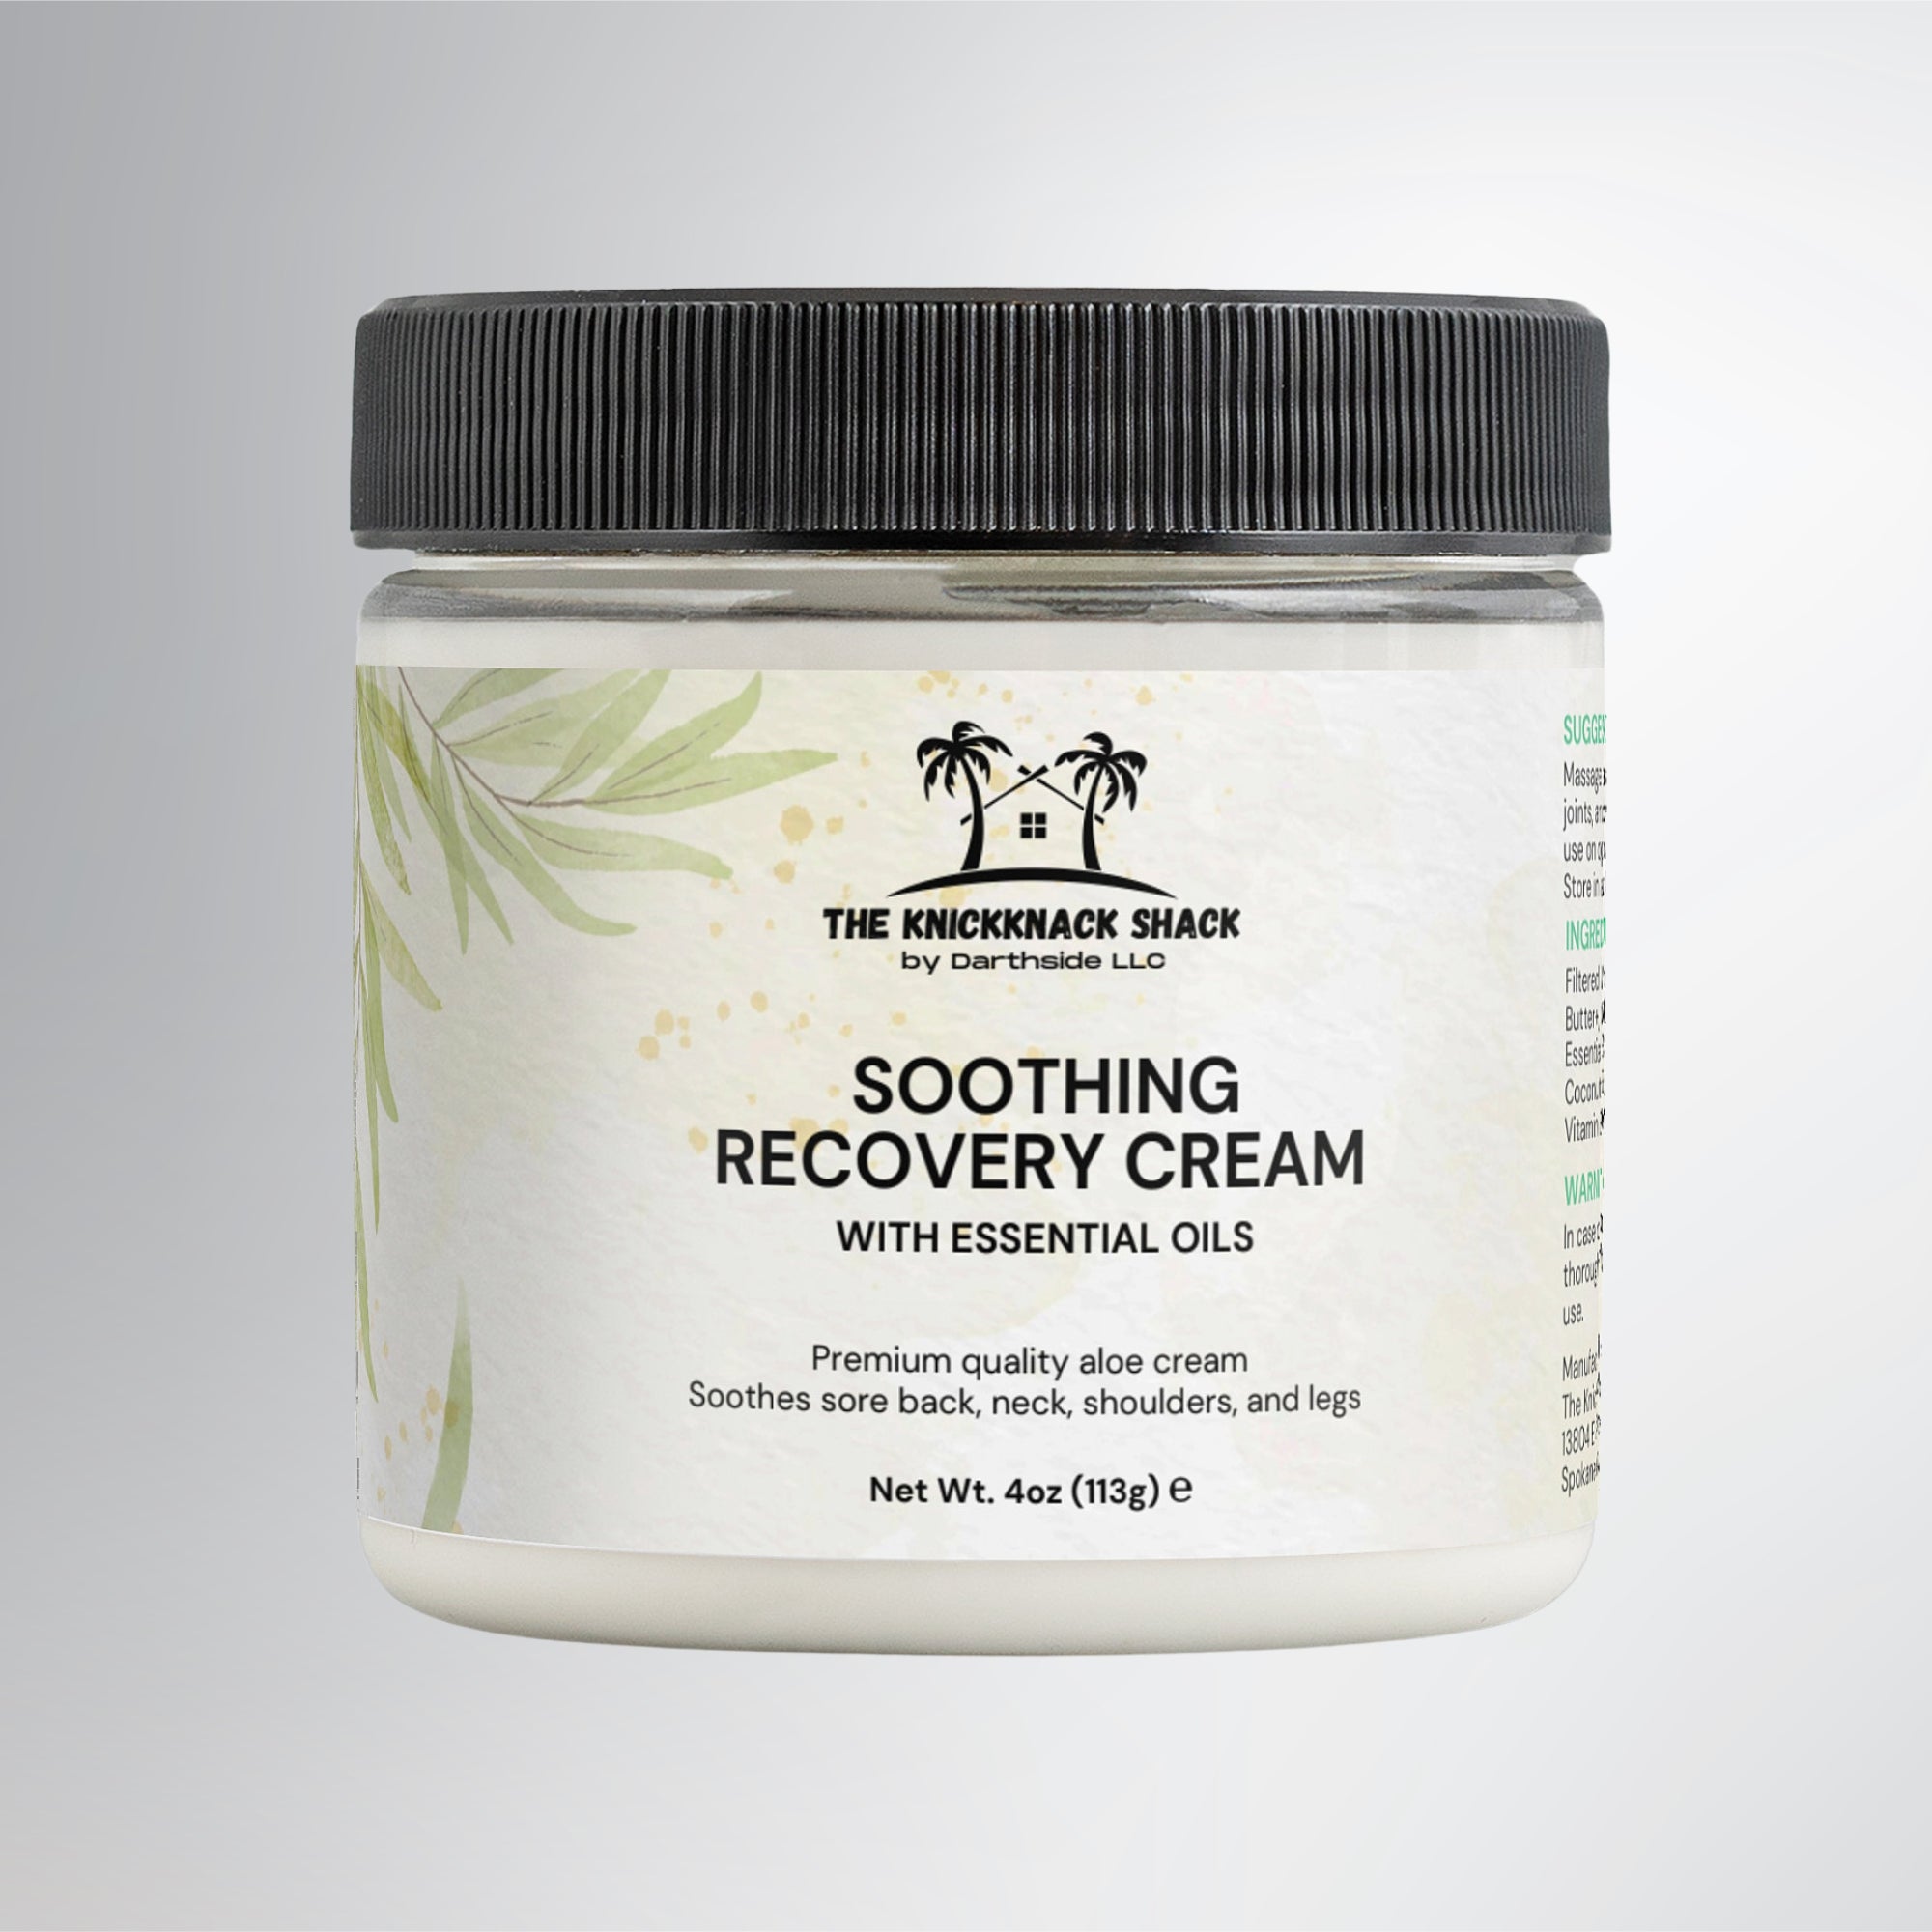 Soothing Recovery Cream